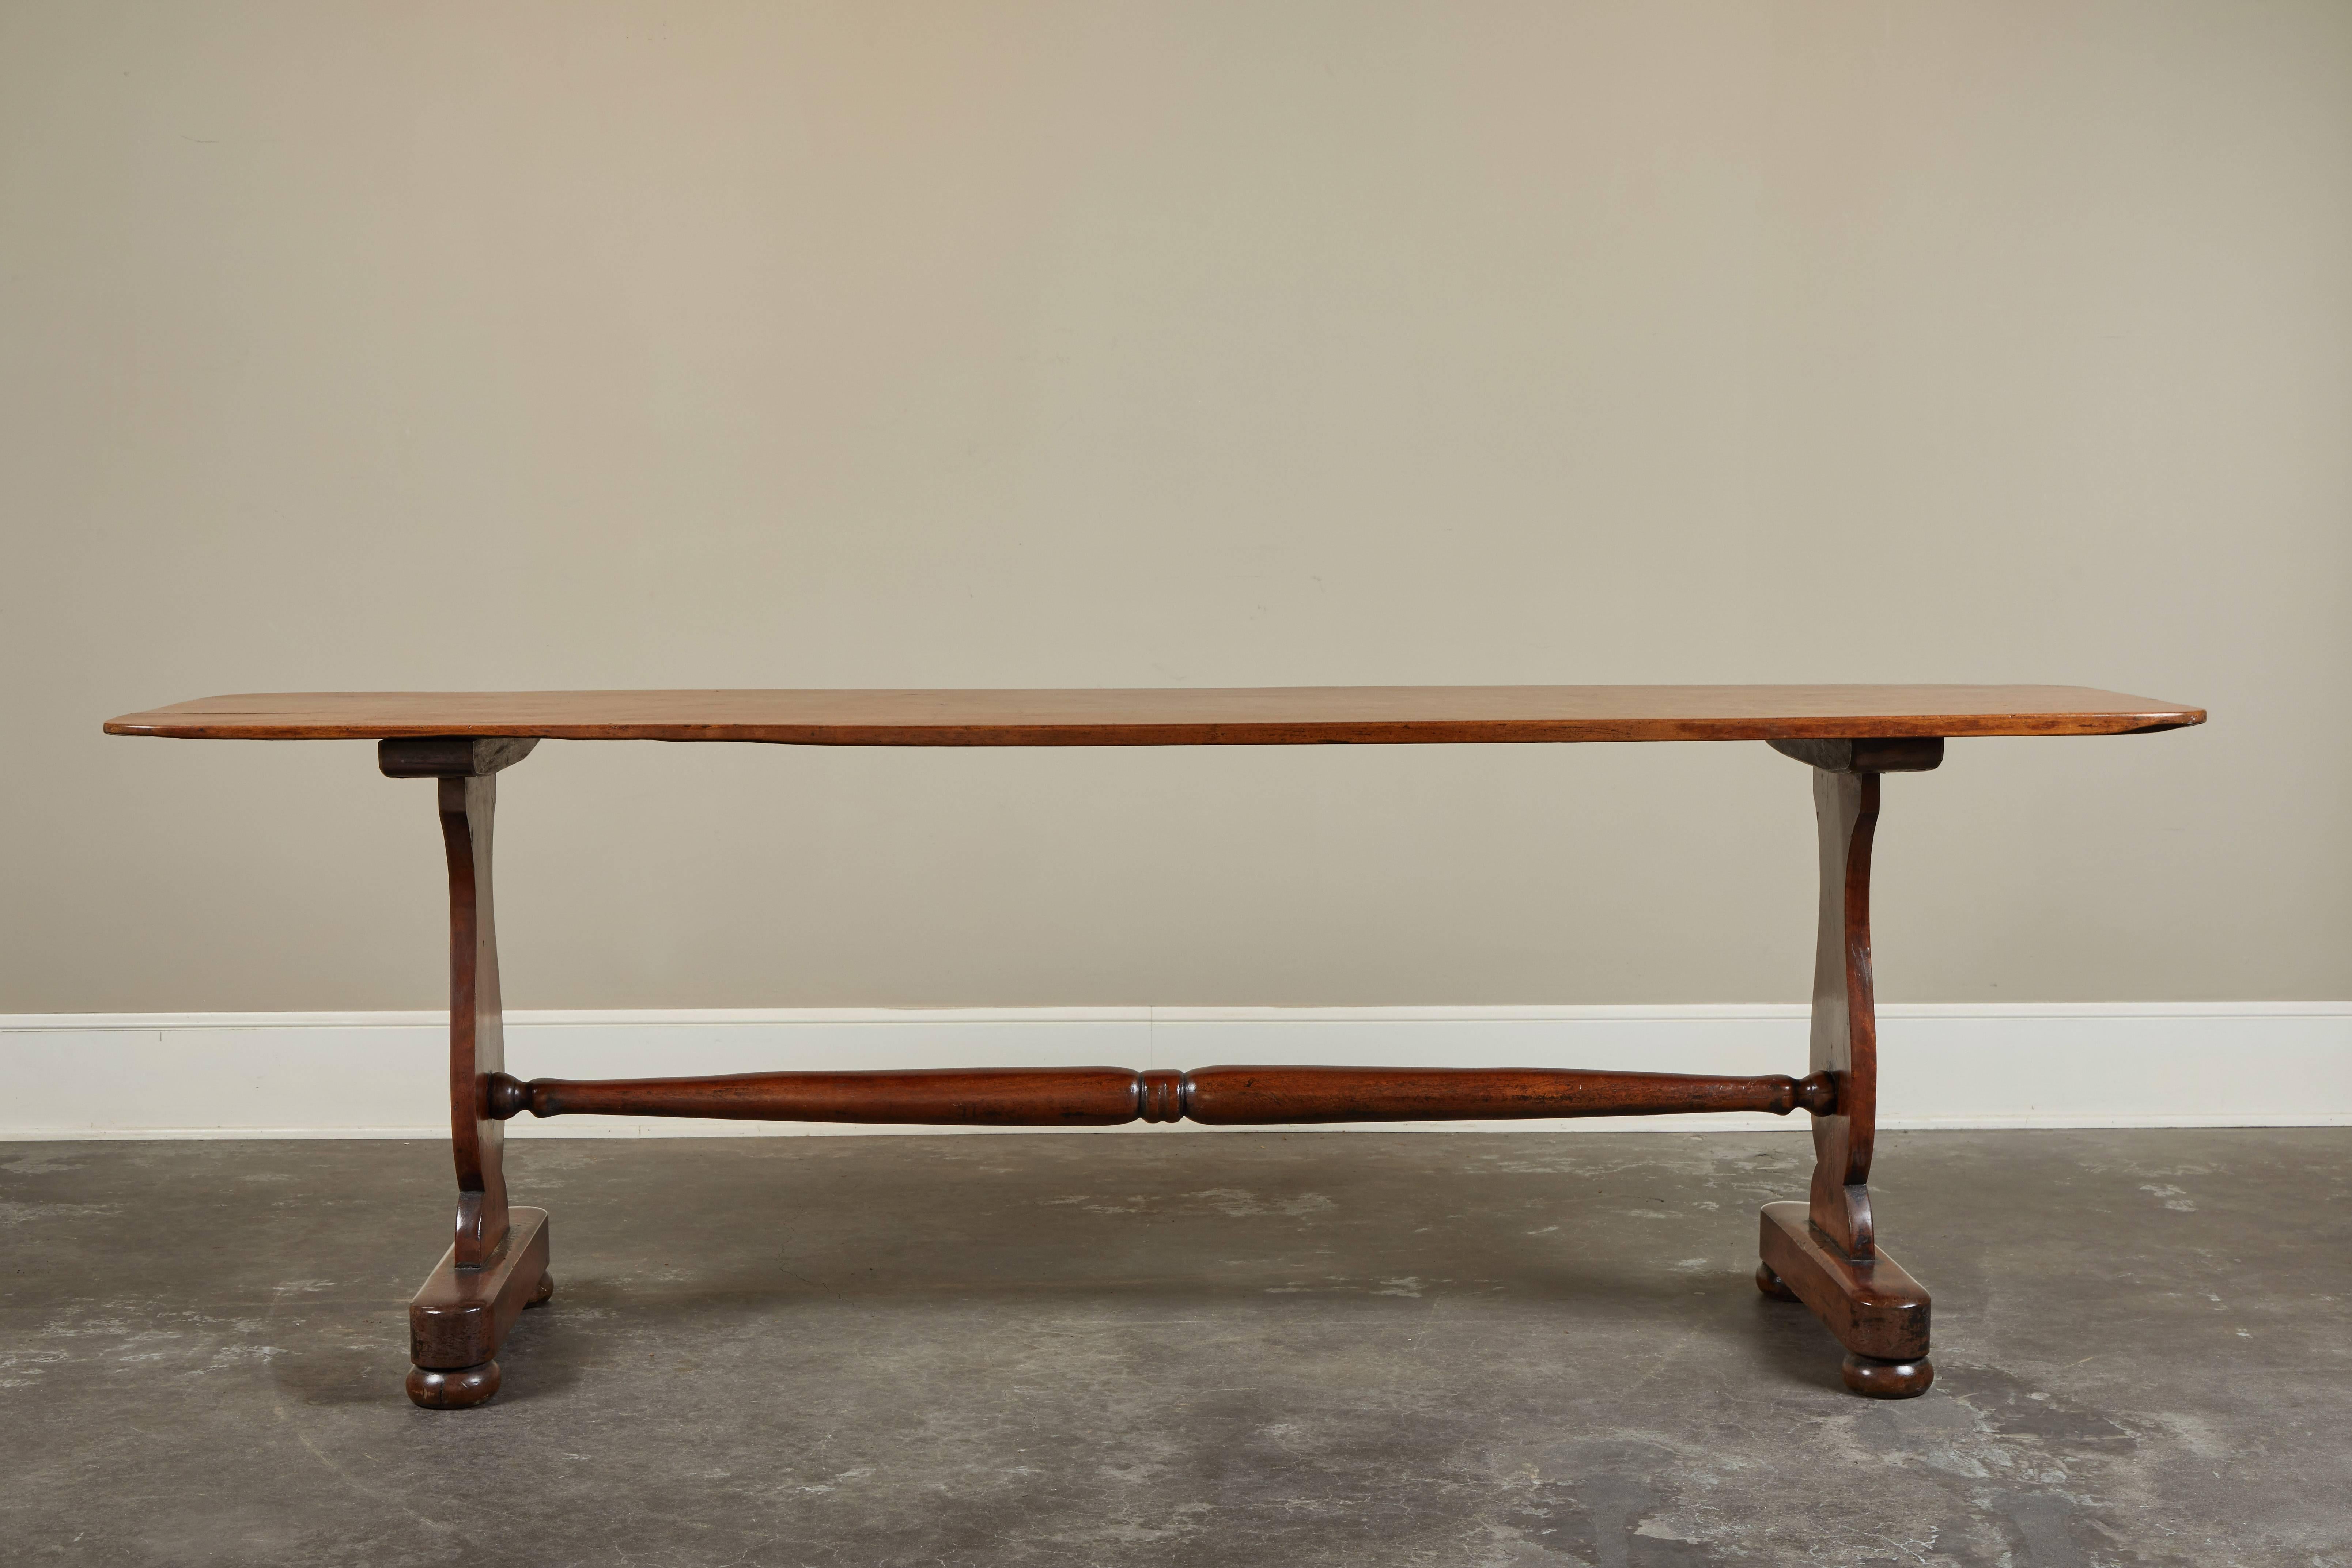 An early 20th century English mahogany trestle table, narrow enough for a sofa back, hall entry or dining room buffet. Clean, trestle legs and single stretcher. Top is a single plank of mahogany.